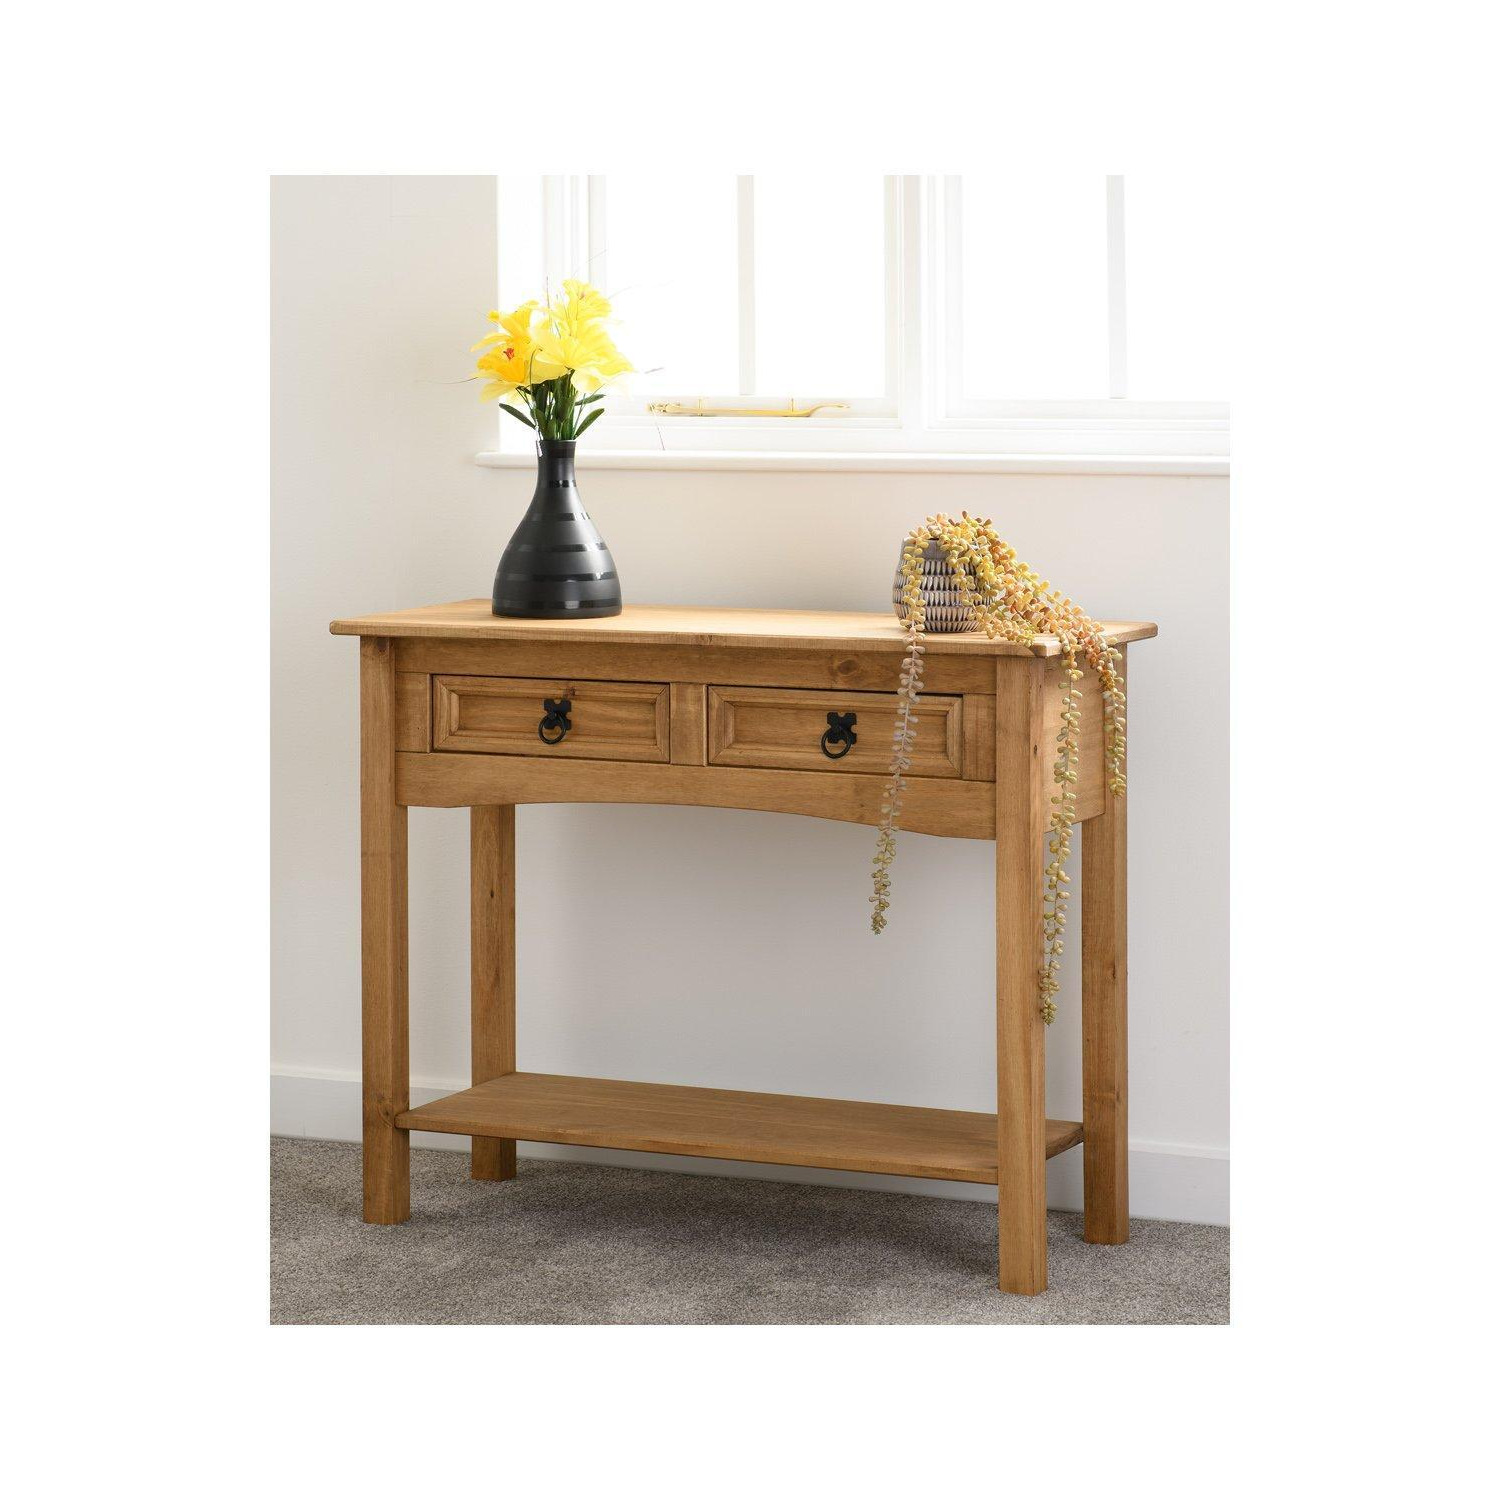 Corona 2 Drawer Console Table With Shelf - image 1